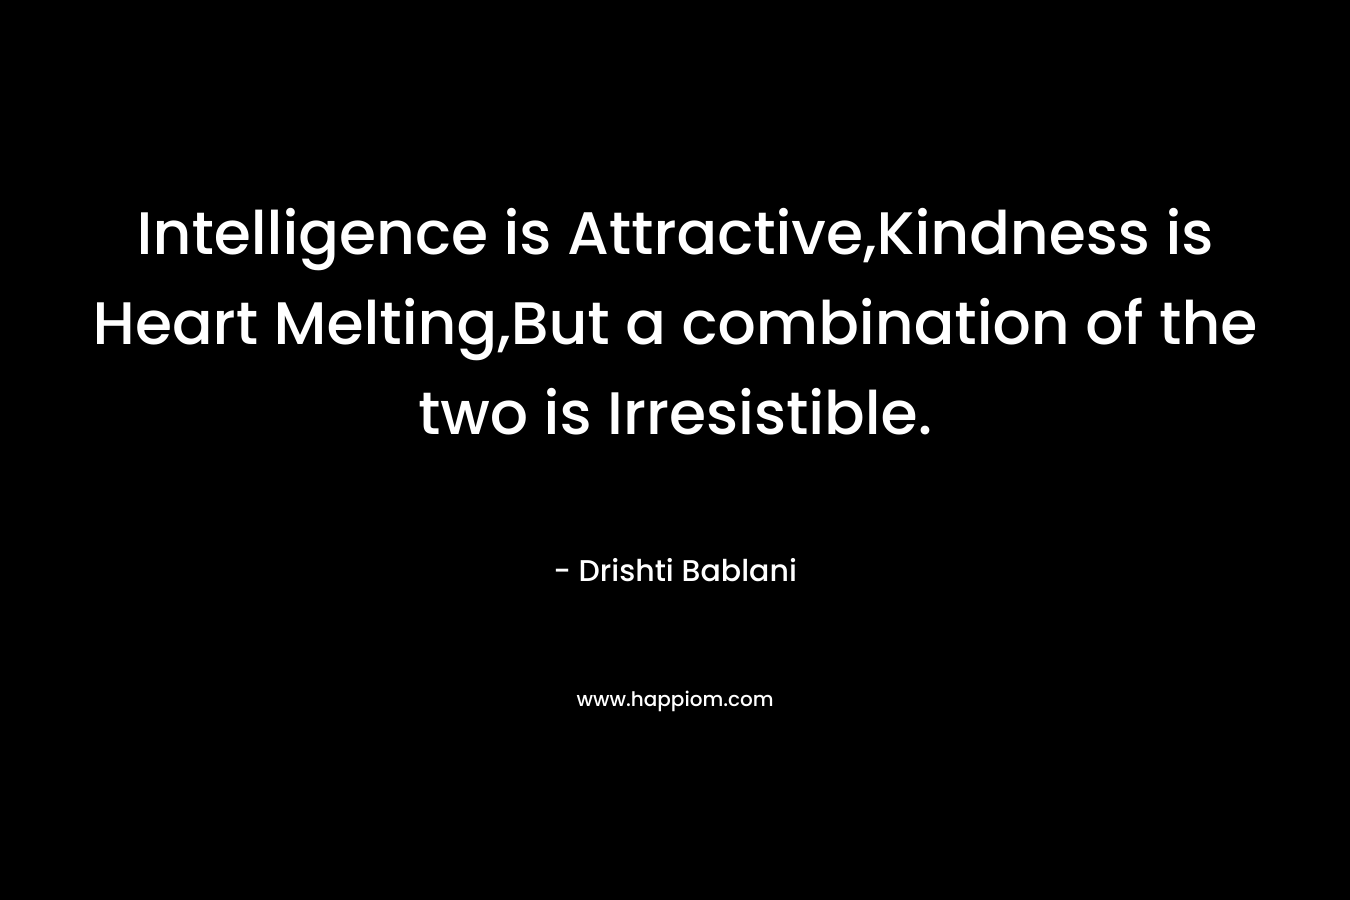 Intelligence is Attractive,Kindness is Heart Melting,But a combination of the two is Irresistible. – Drishti Bablani